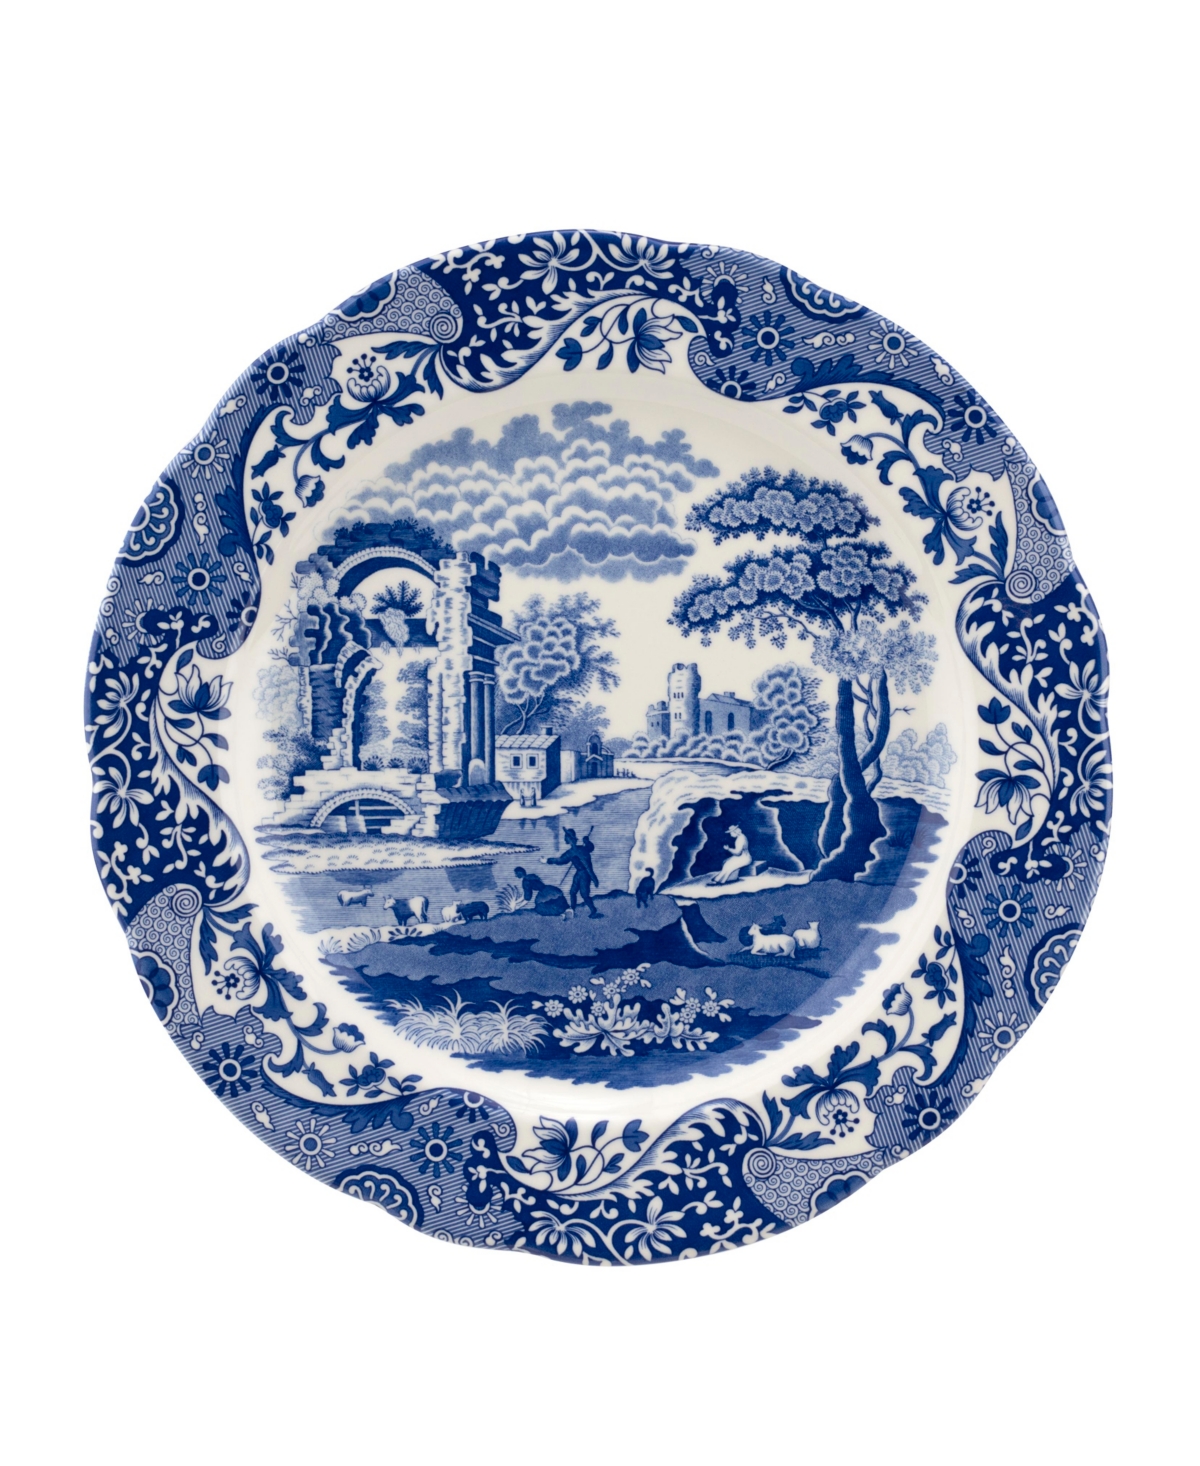 Blue Italian Charger Plate - Blue